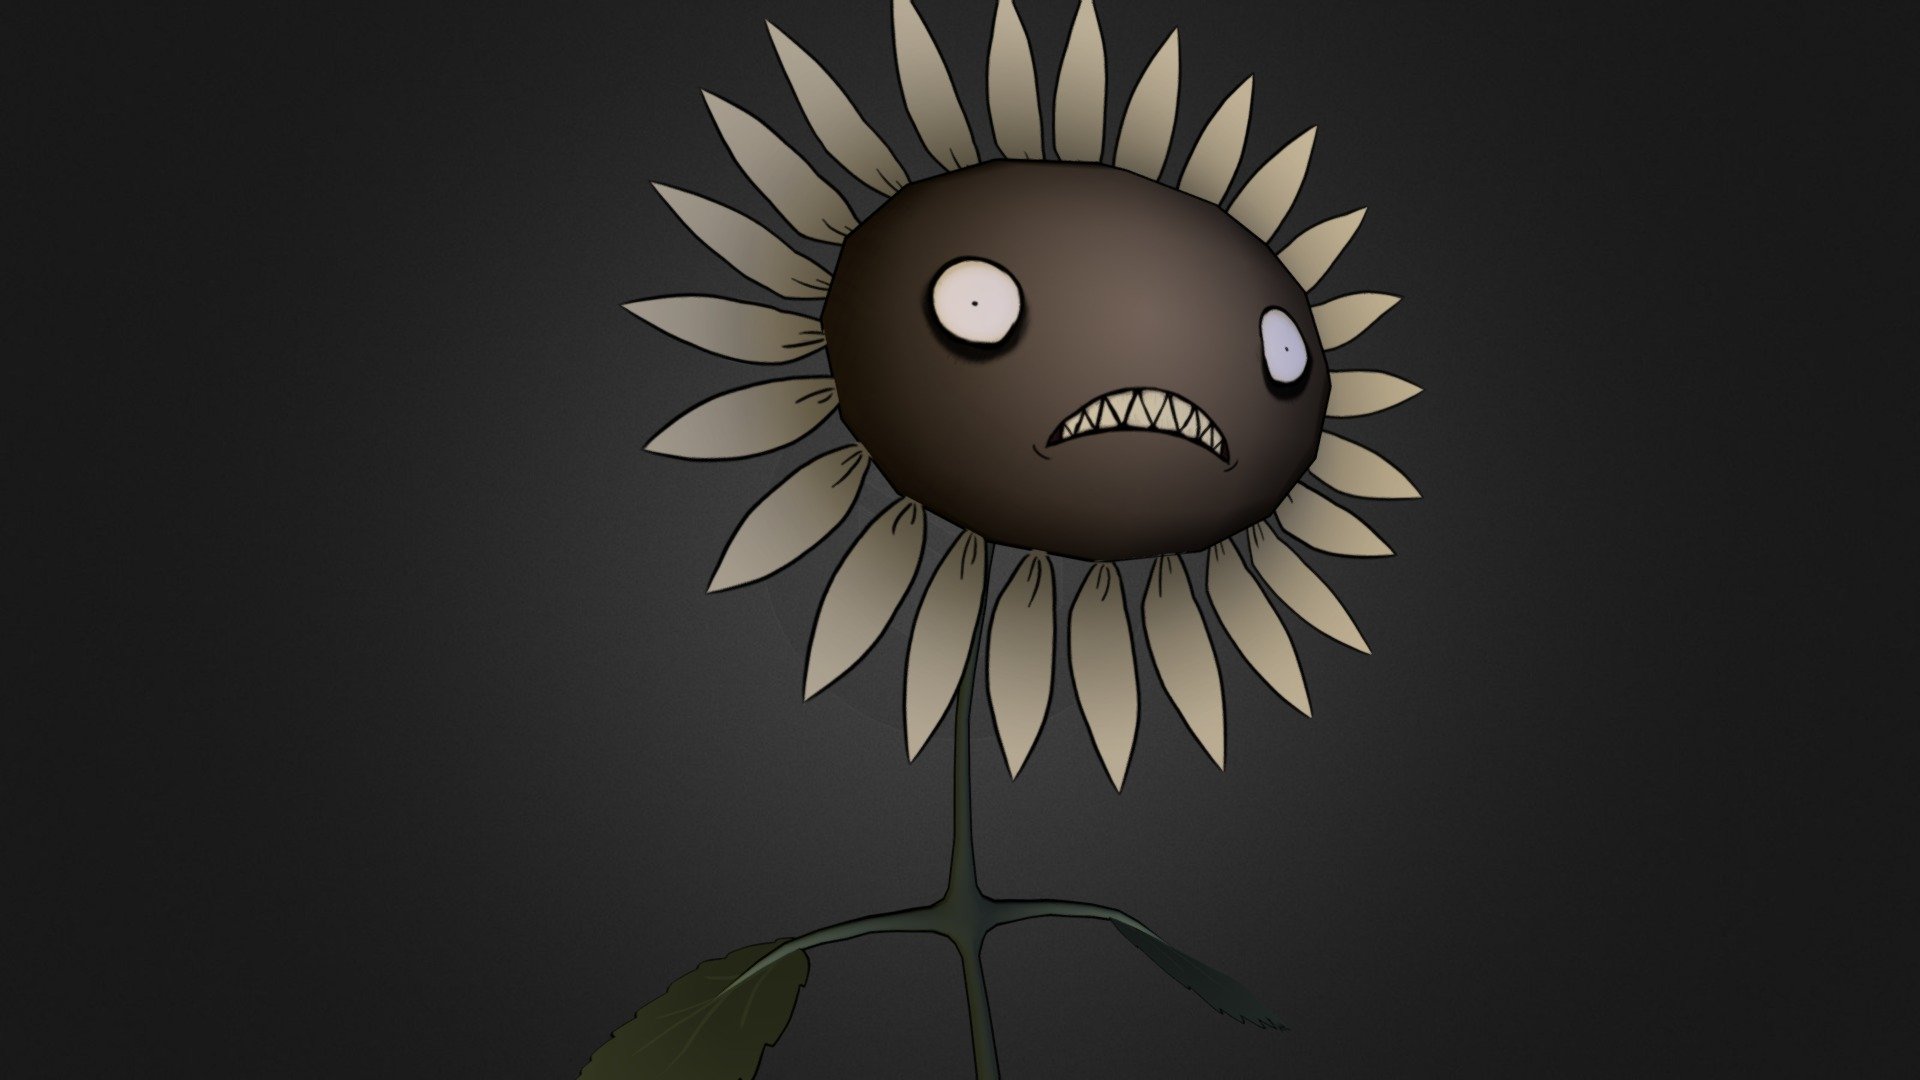 Tim Burton style Sunflower for a game environment.
Style inspired by Hatboy's  Burton x Pokemon project.

This is a WIP. There's a lot I still need to clean up, namely the Alphas. This was just a quick upload to log my progress. Will update soon - Sunflower - 3D model by Sol (@solkaboom) 3d model